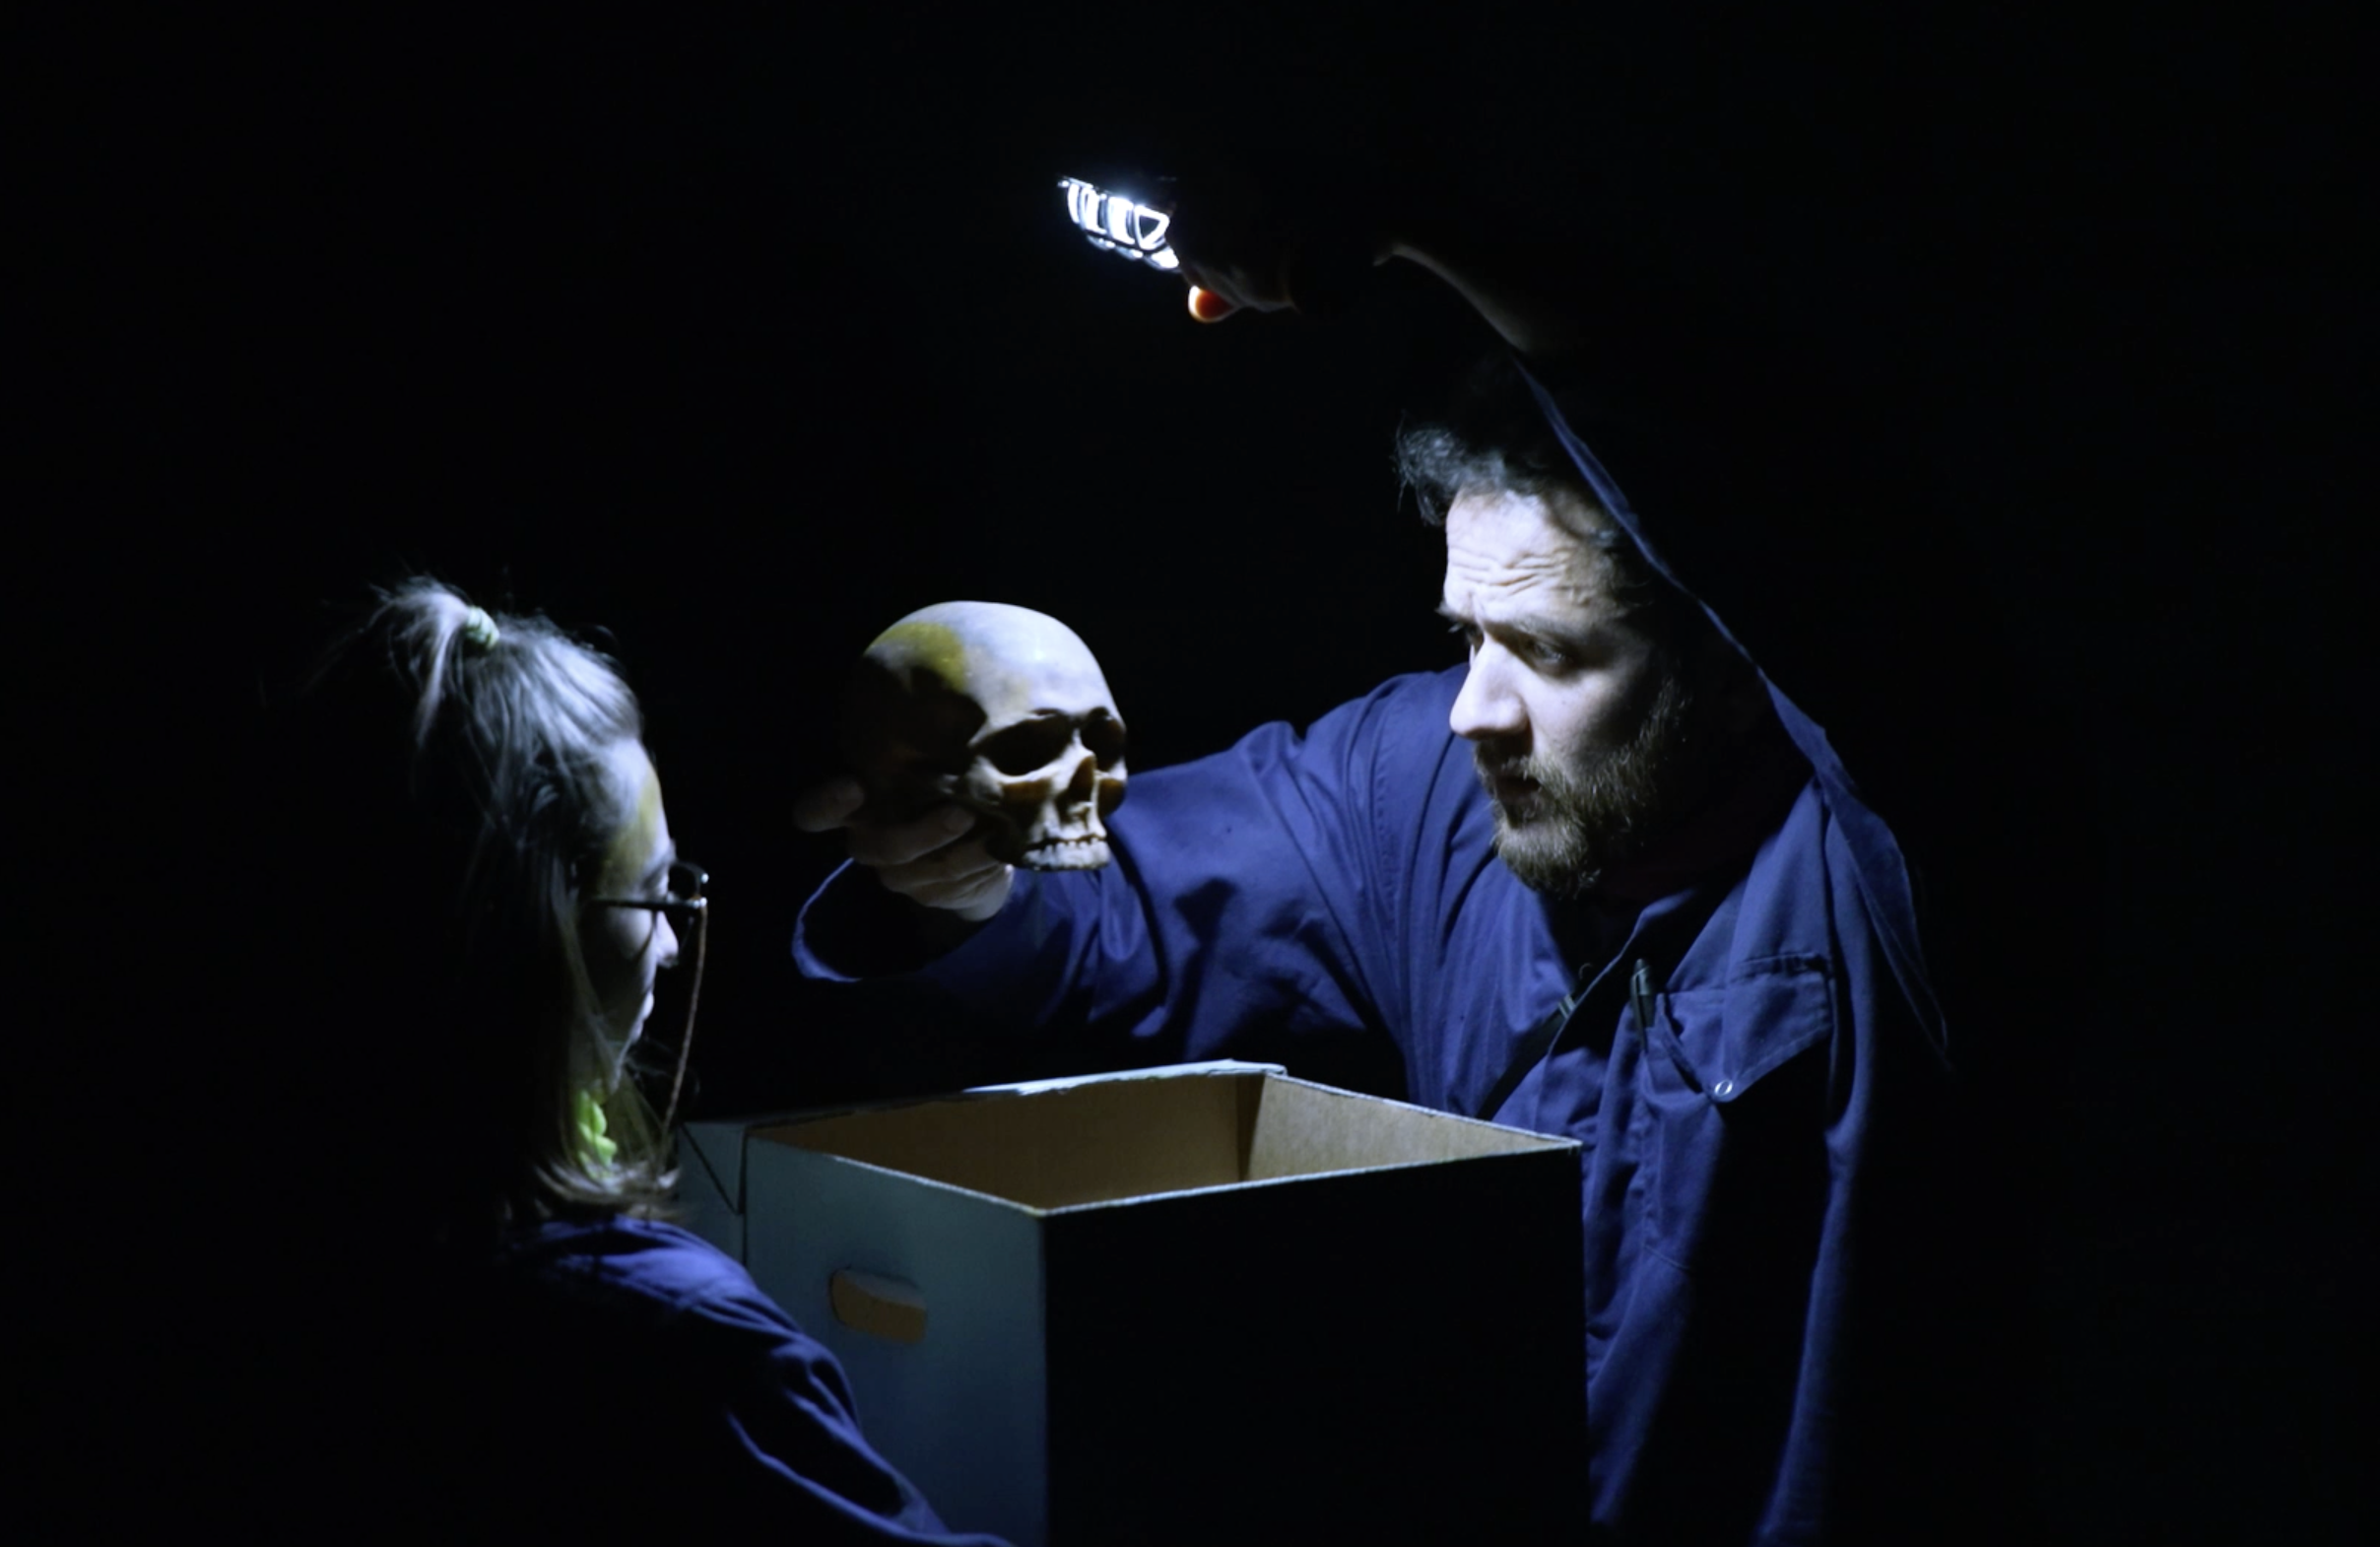 Two people study a skull which is being lifted out of a box